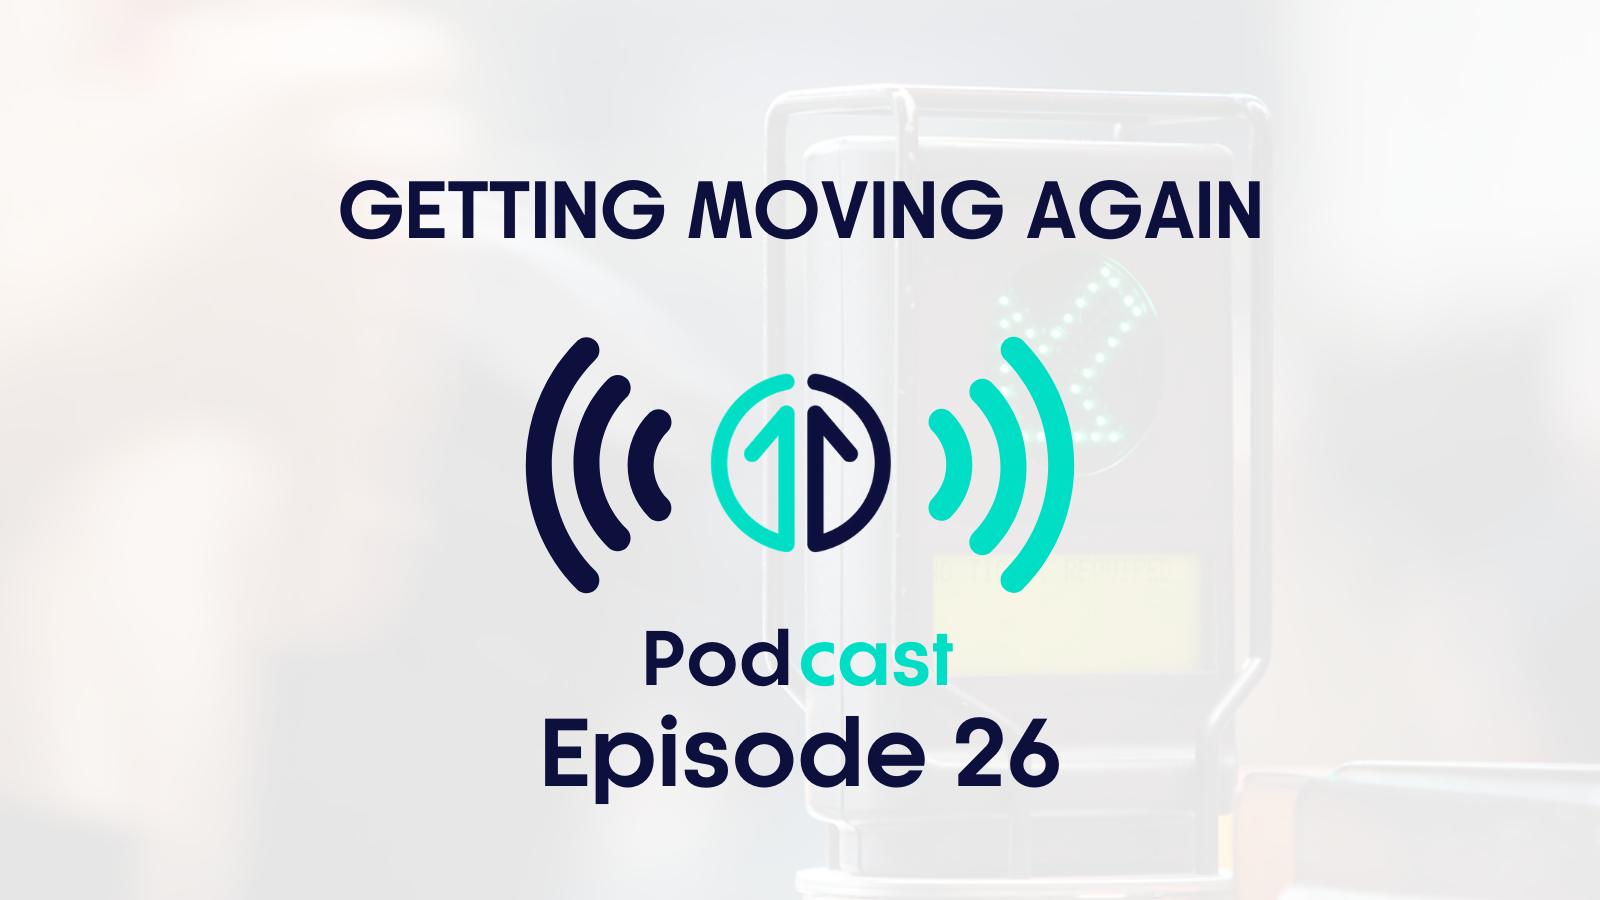 Getting Moving Again podcast